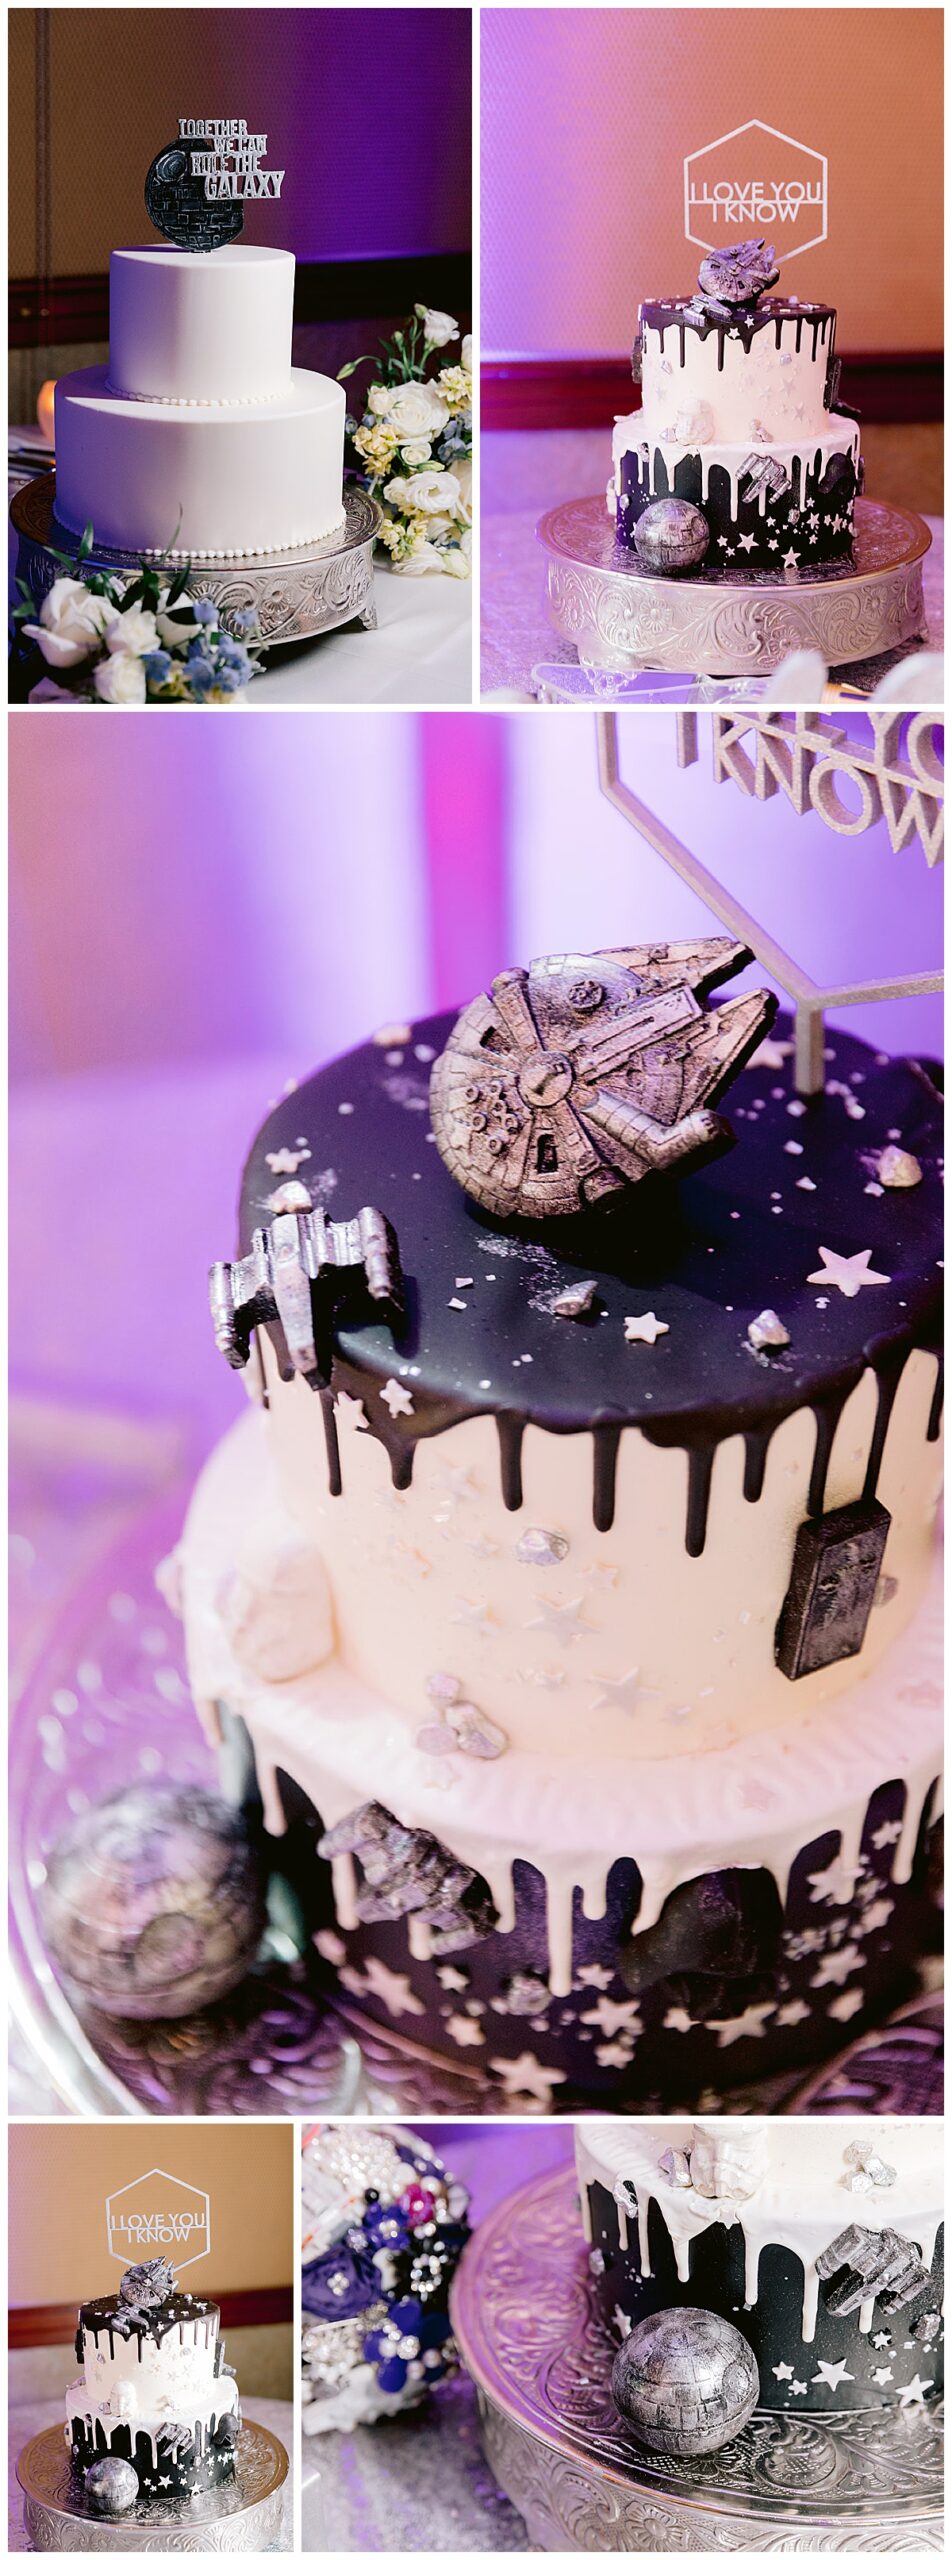 May the Fourth Be With You: Star Wars Weddings. Star Wars inspired Wedding Cake